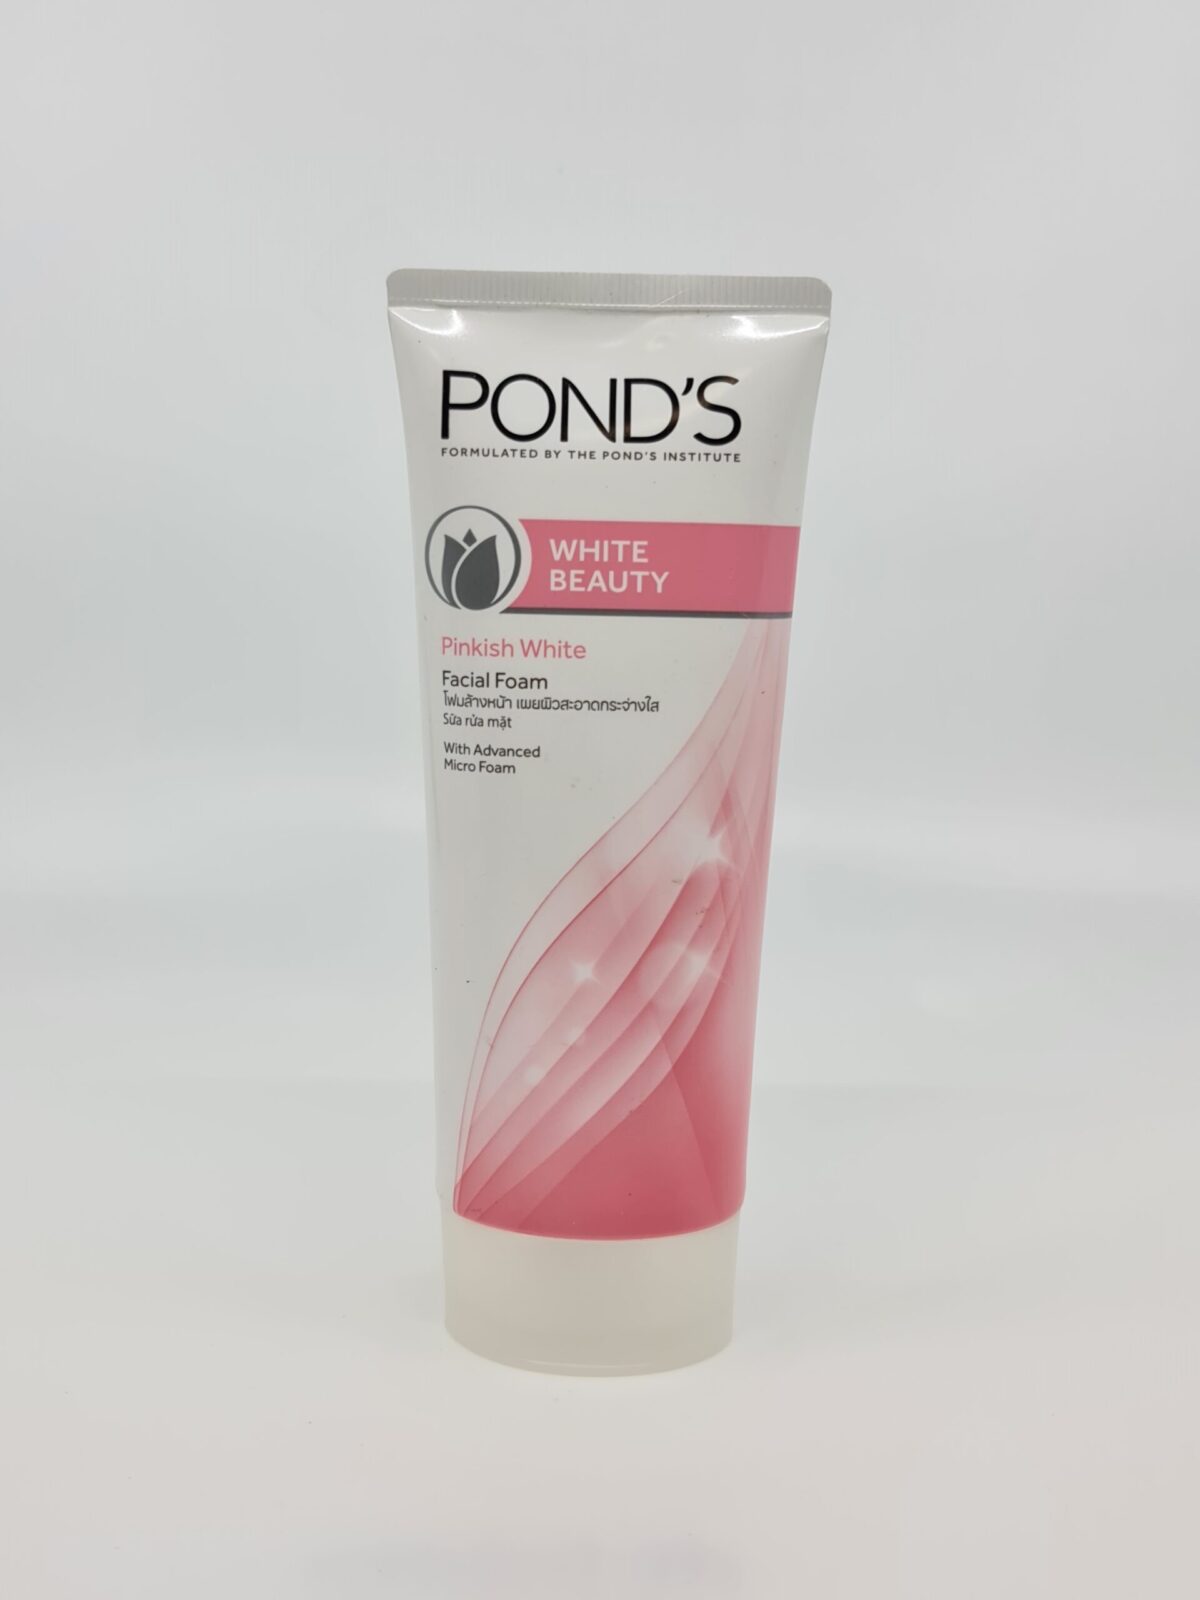 Ponds White Beauty Malaysia - Ponds White Beauty Pinkish White Facial Foam 100g | Toko ... : Your skin looks visibly younger and radiant.